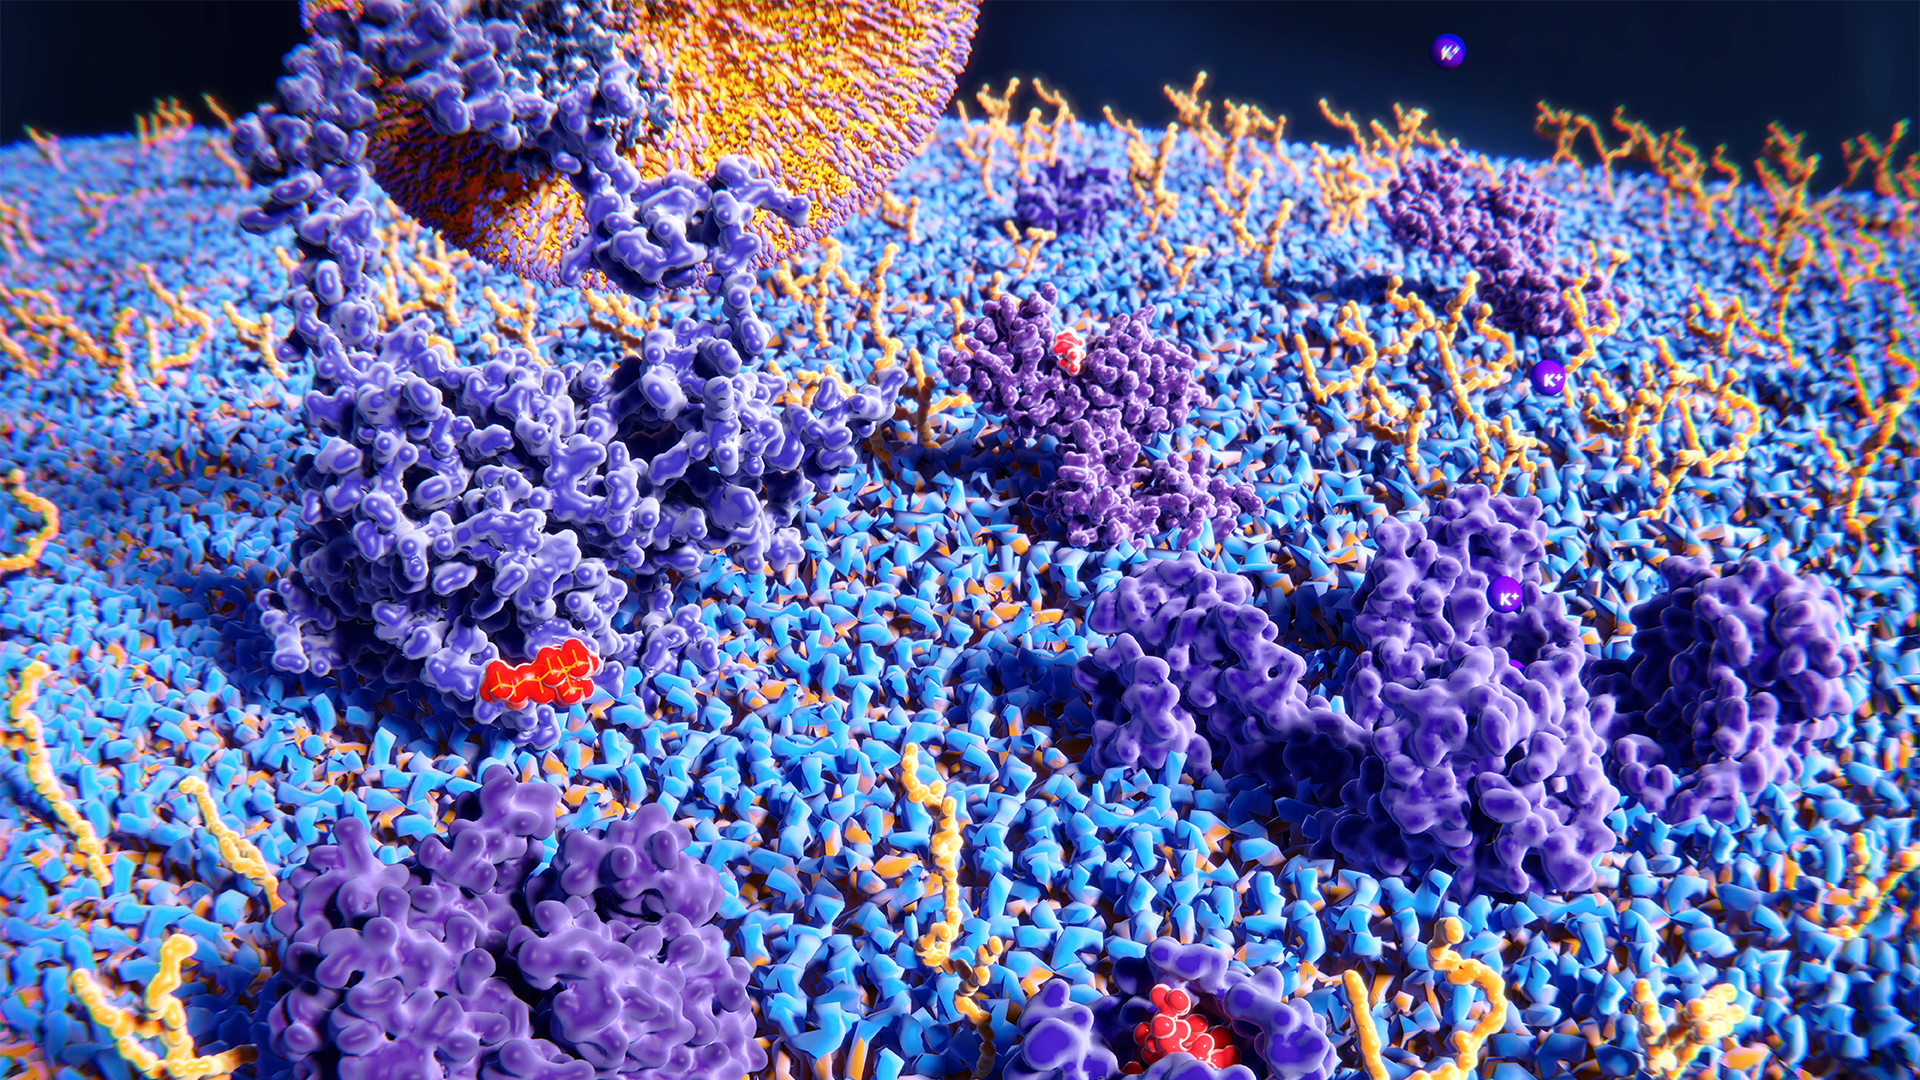 Upper cell membrane Membrane proteins (violett), glycolipids (yellow) and their ligands: LDL receptor, acetyl choline receptor, histamine receptor, potassium channel, opioid receptor, 3d rendering